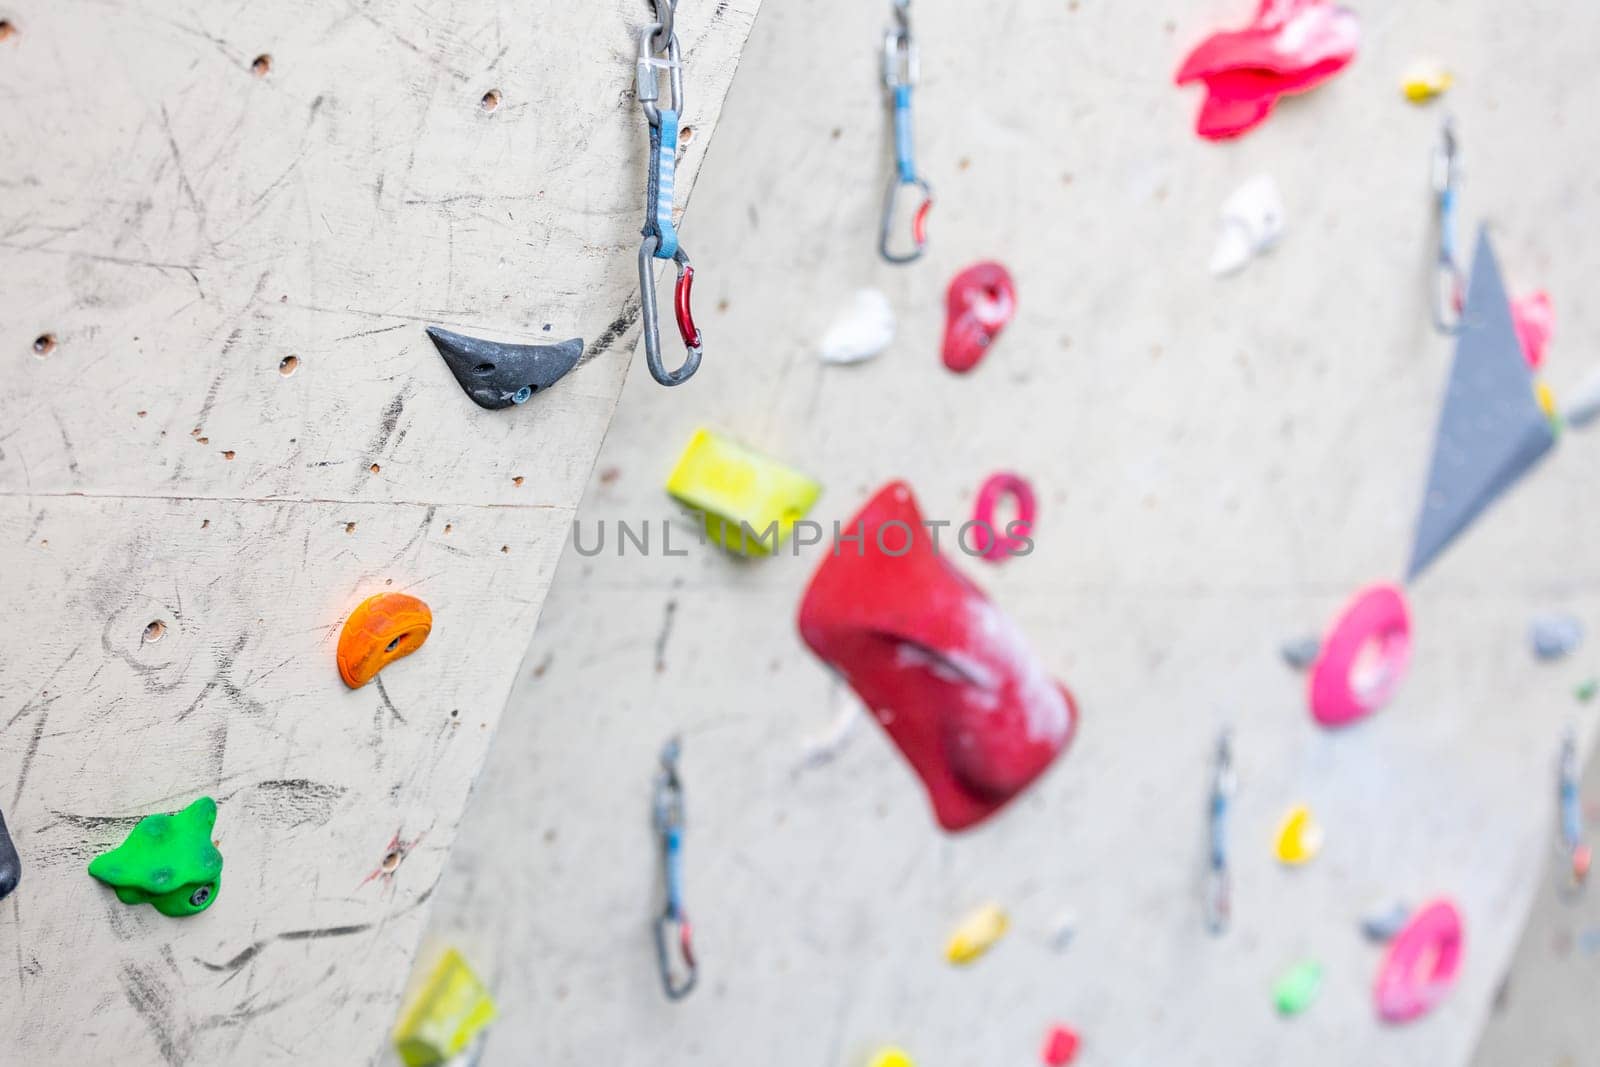 Close up of indoor climbing wall with carbines and colored grips fix it on a wall, concept of climbing